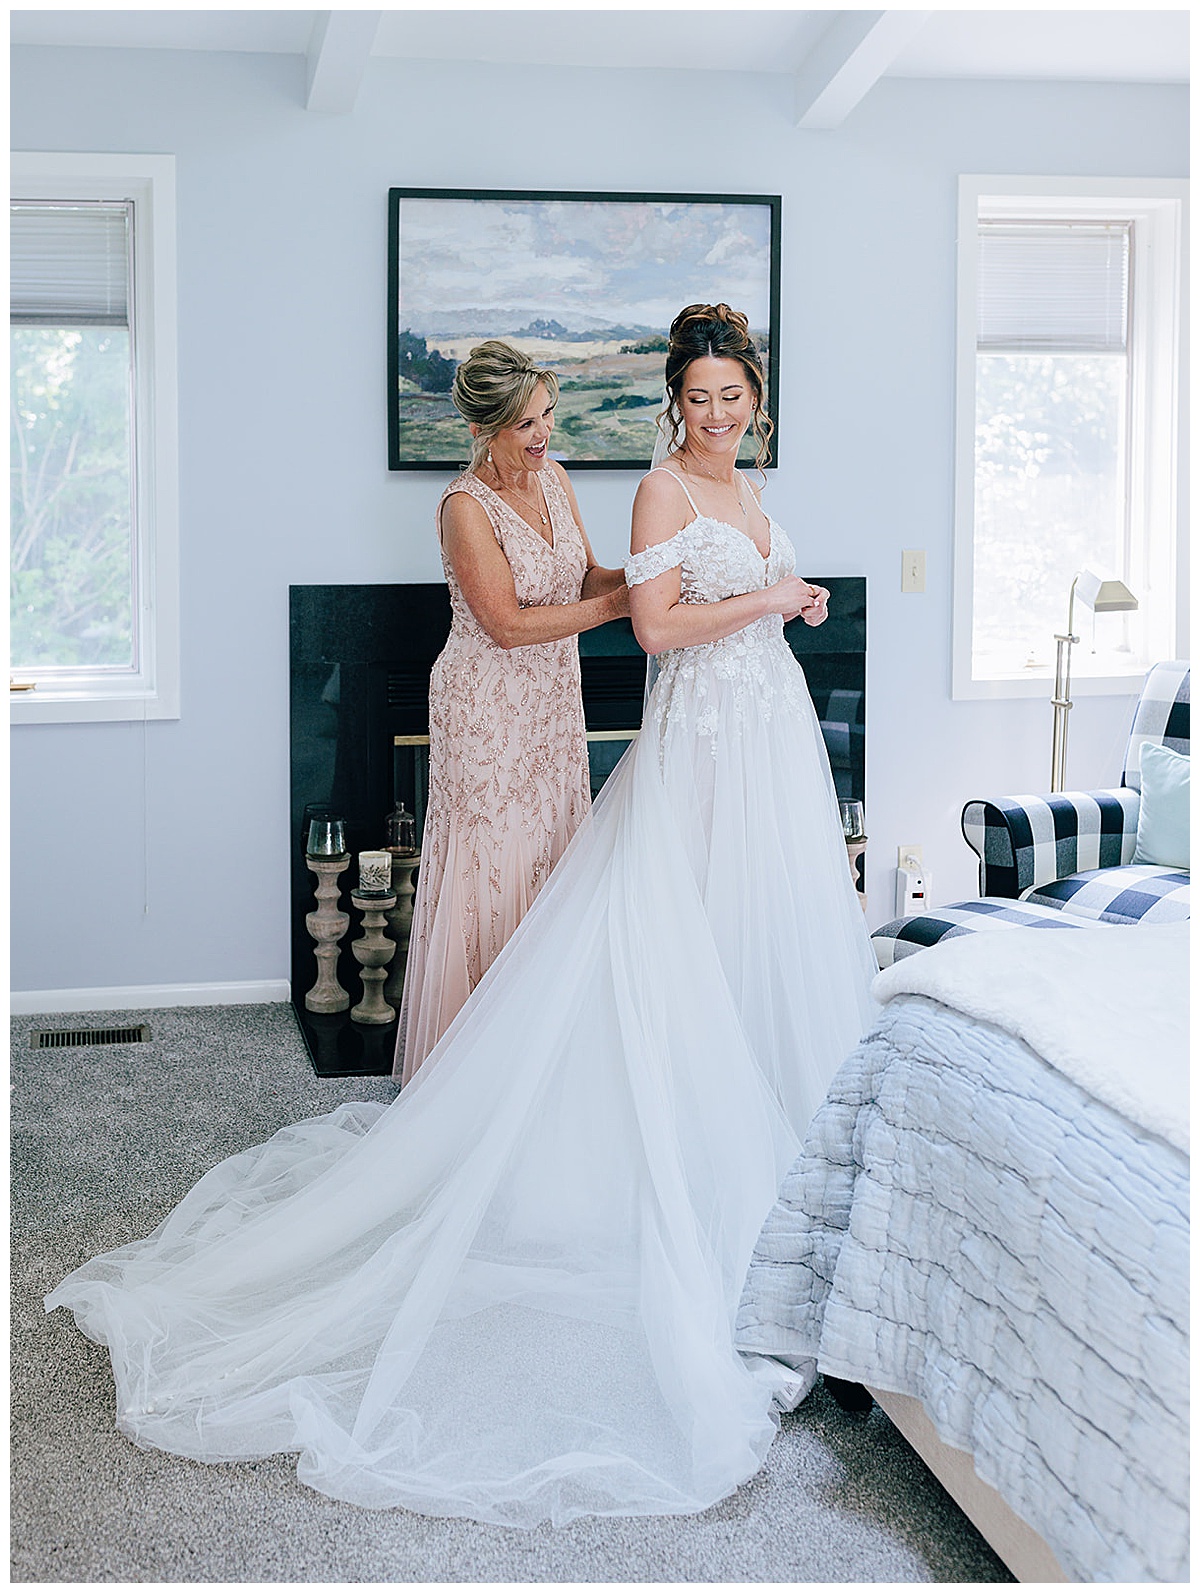 Mother of the bride helps bride in dress for Kayla Bouren Photography